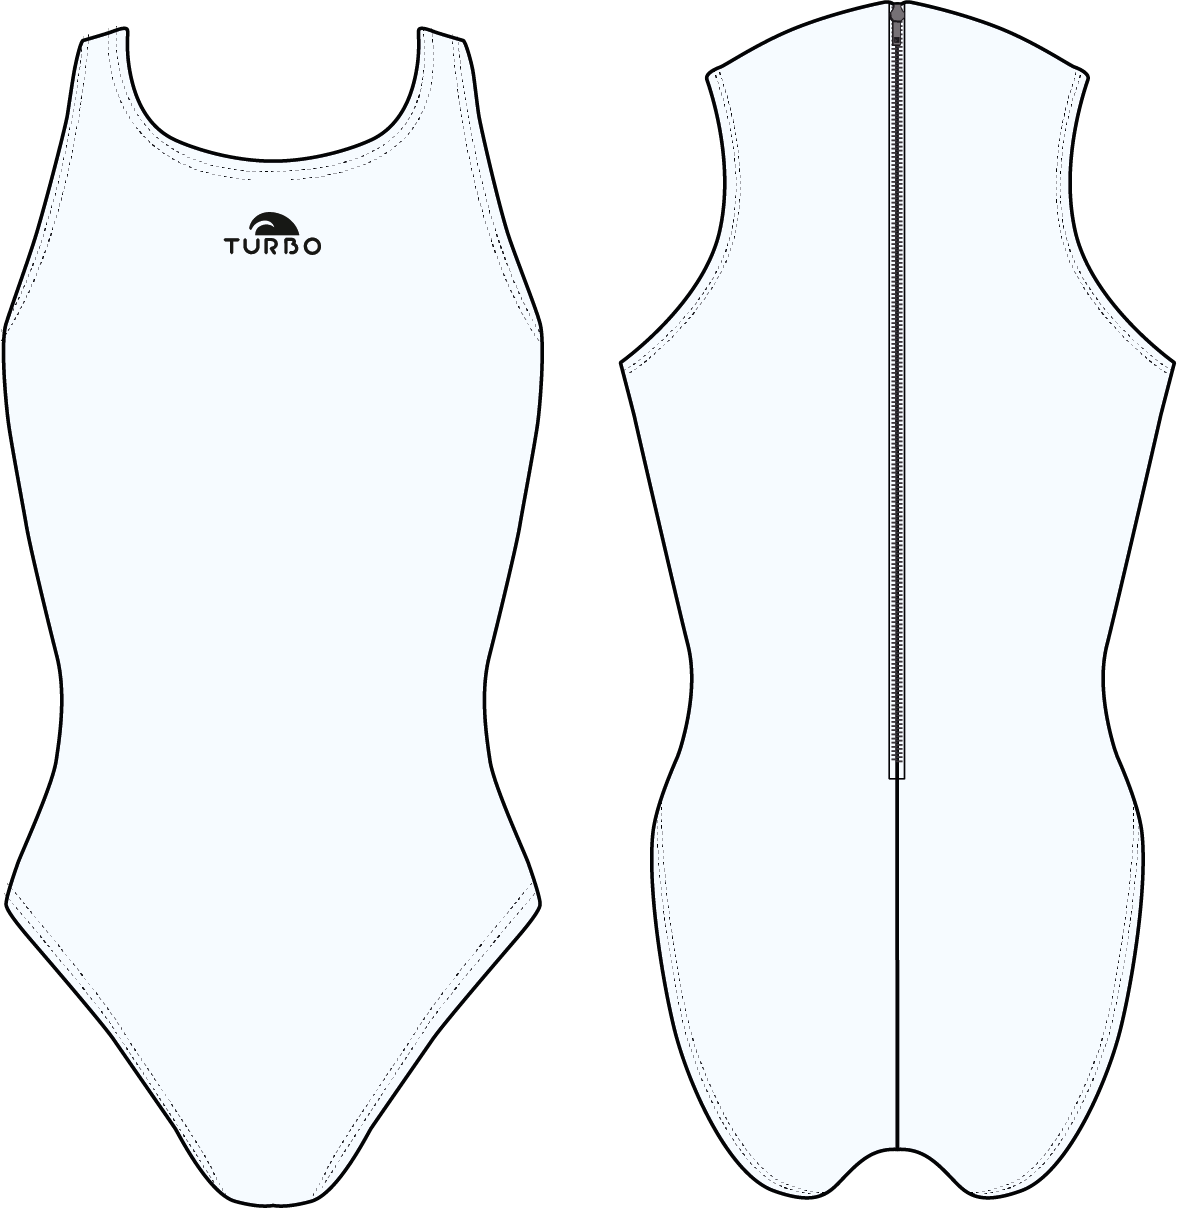 WATER POLO SUIT